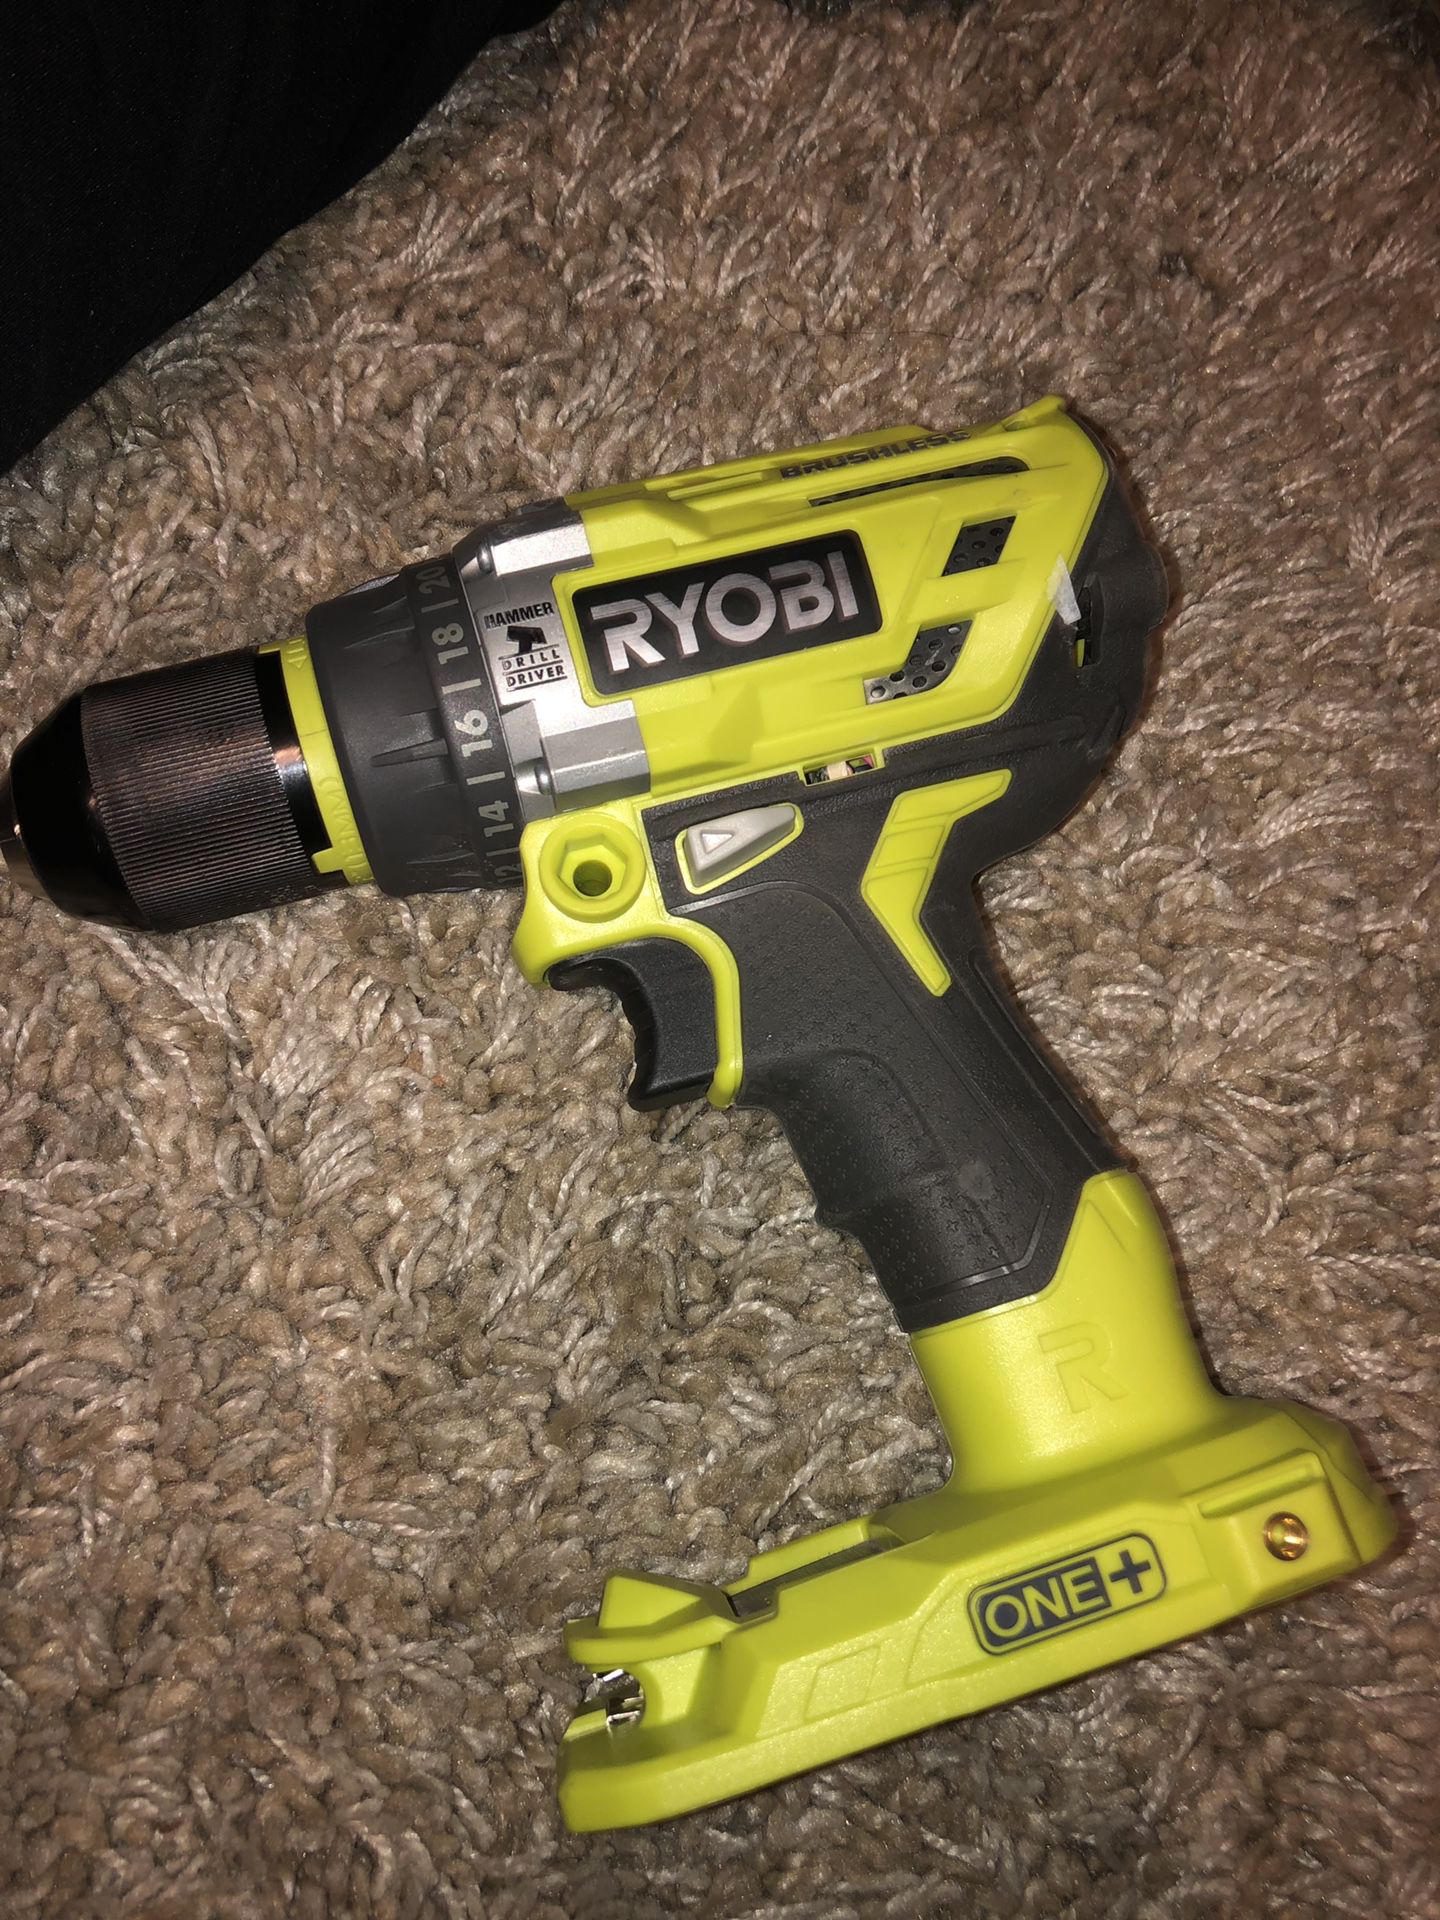 Ryobi 18-Volt ONE+ Cordless 1/2 in. Hammer Drill/Driver (Tool Only)